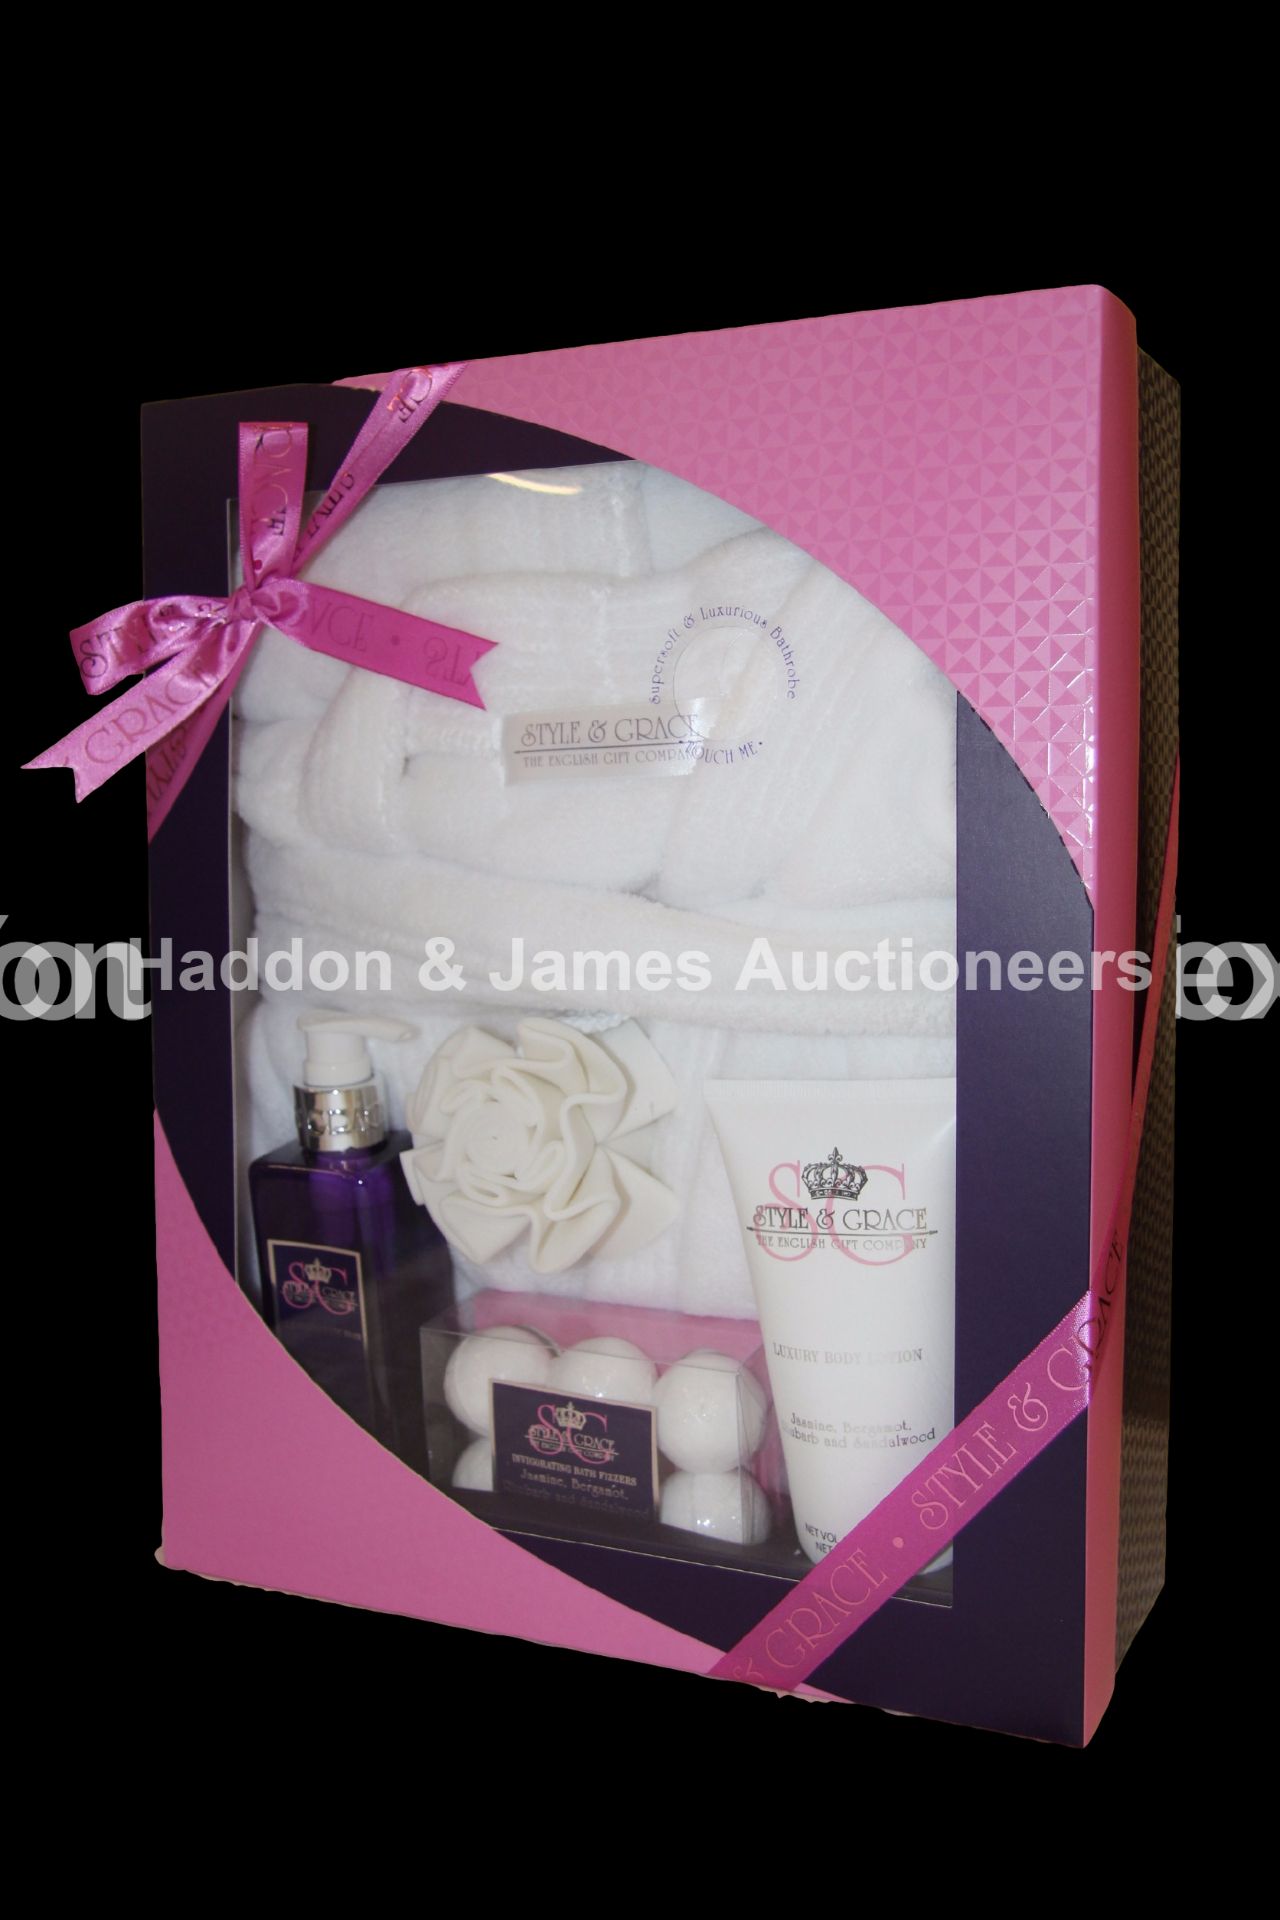 V Brand New Style & Grace Deluxe Robe Gift Set Including Bath Fizzers, Body Lotion And Body Wash